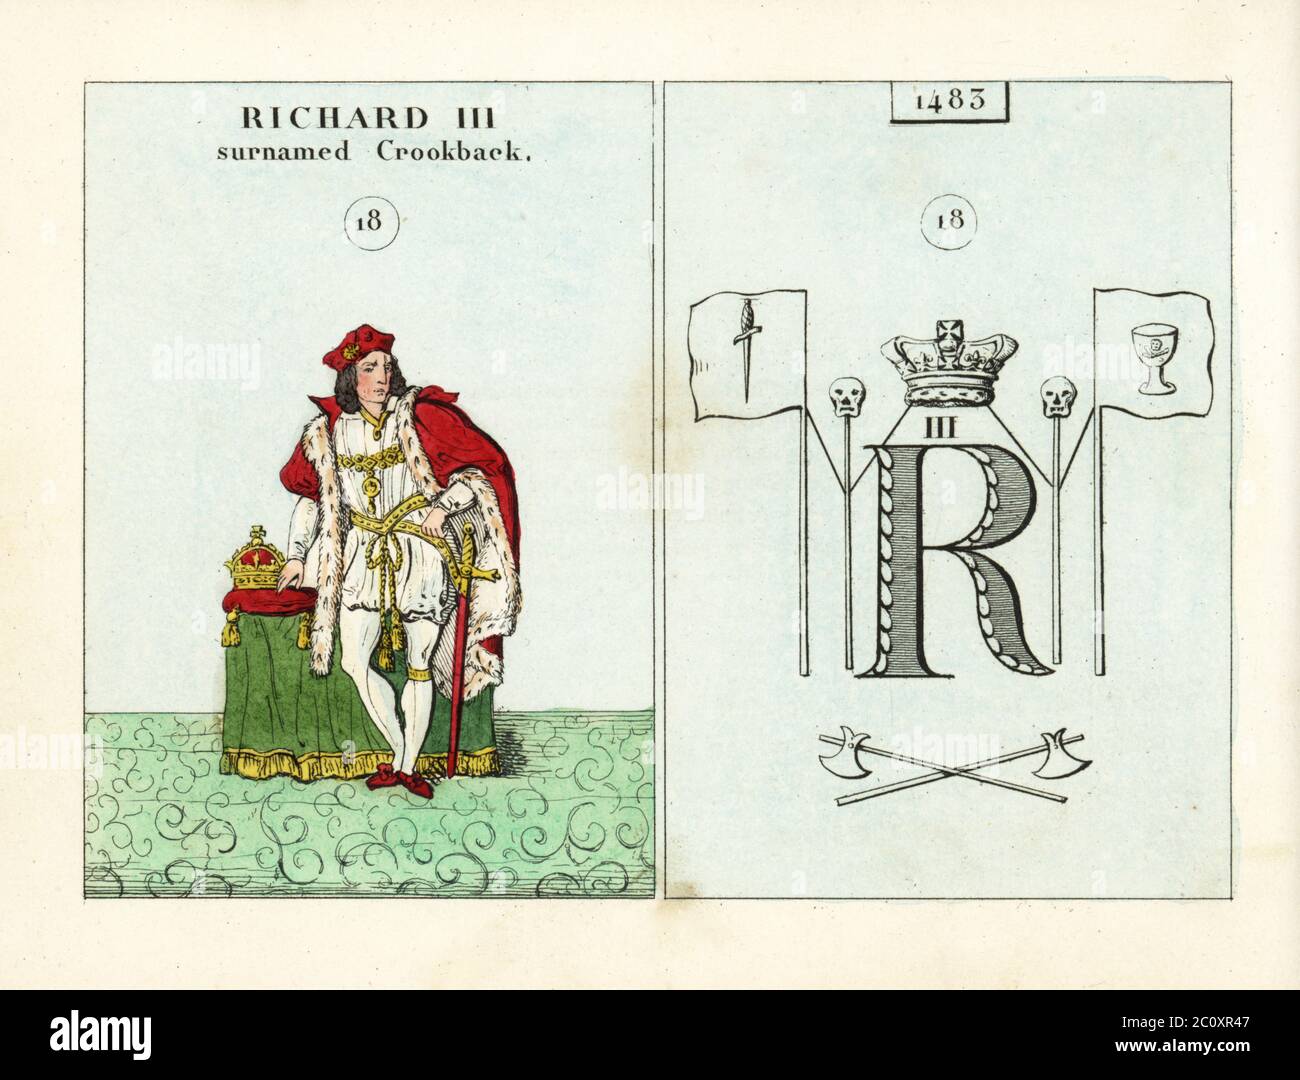 Portrait of King Richard III of England, surnamed Crookback. With cap, ermine mantle, sword and crown. Emblem indicates assassins supporting the crown. Handcoloured steel engraving after an illustration by Mary Ann Rundall from A Symbolical History of England, from Early Times to the Reign of William IV, J.H. Truchy, Paris, 1839. Mary Ann Rundall was a teacher of young ladies in Bath, and published her book of mnemonic emblems in 1815. Stock Photo